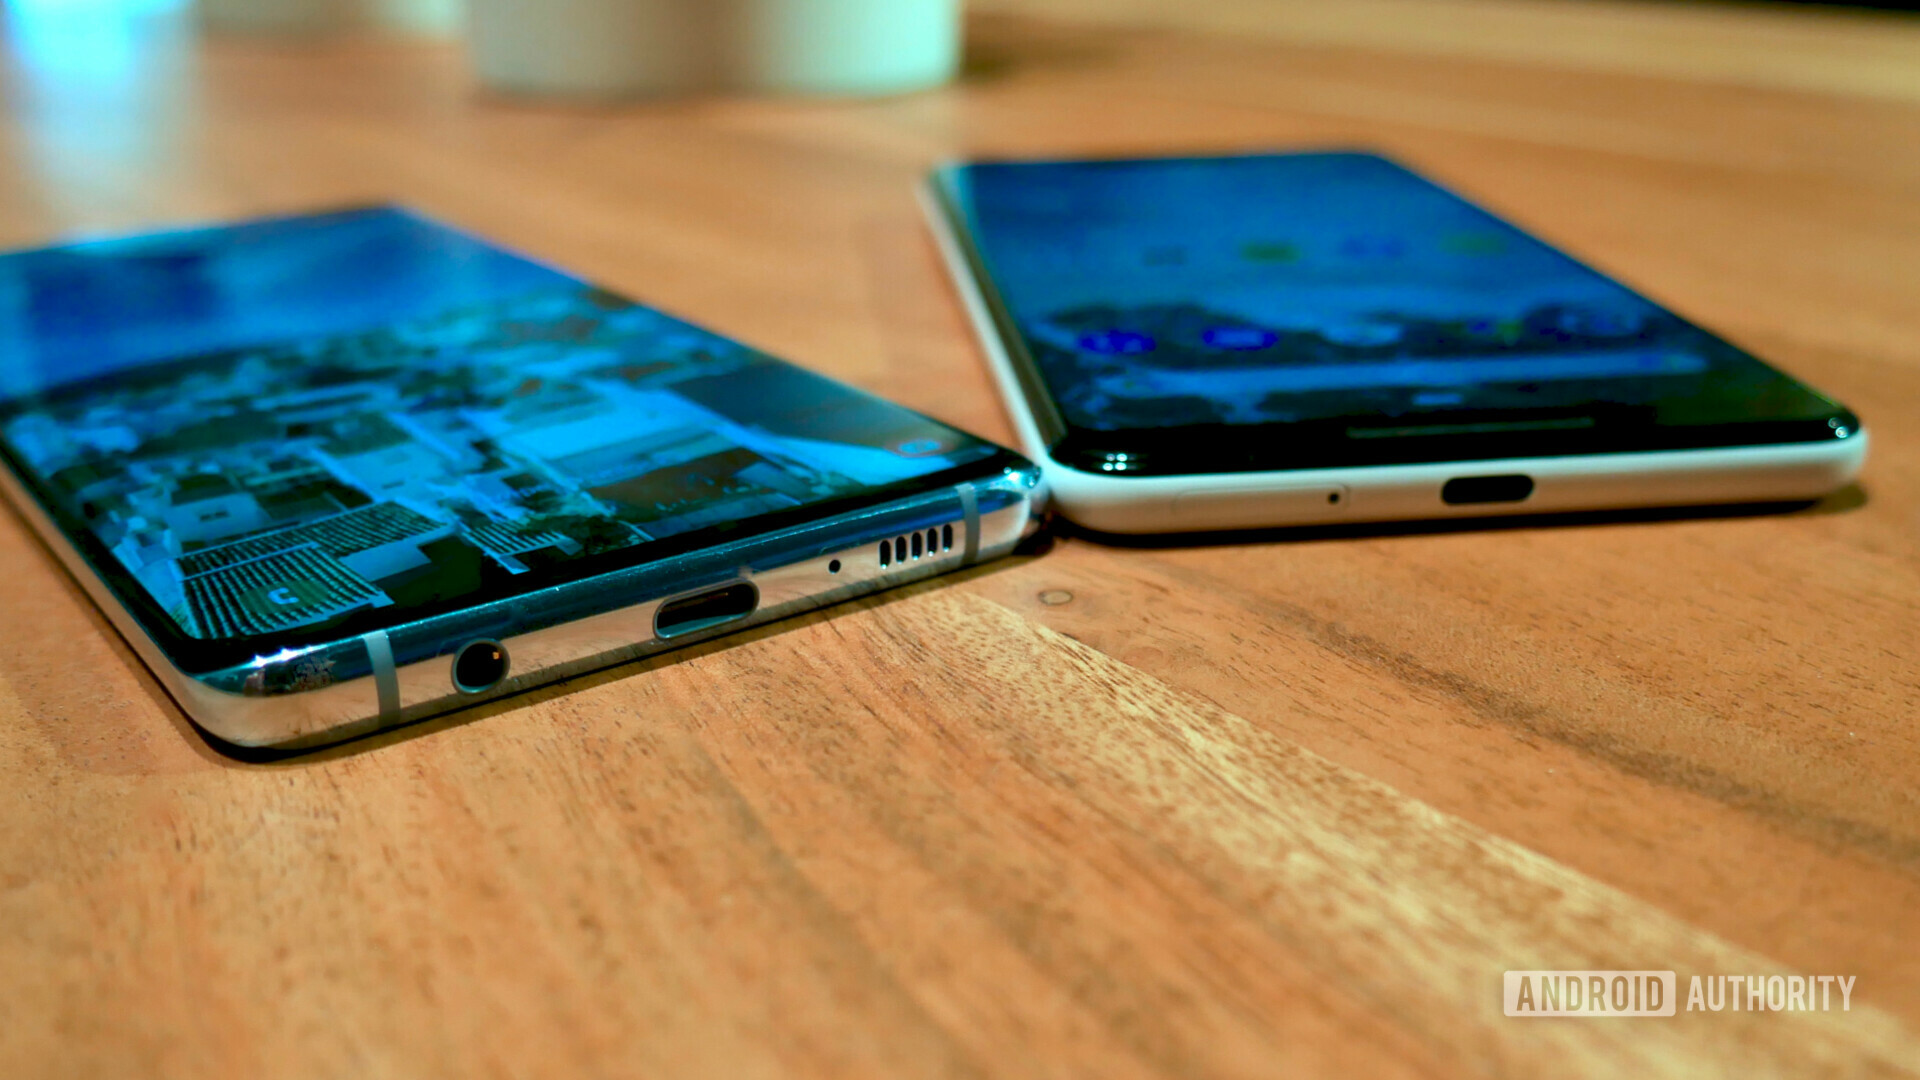 Bottom side photo of the Samsung Galaxy S10 Plus next to a Google Pixel 3 XL showing the USB-C and headphone jack